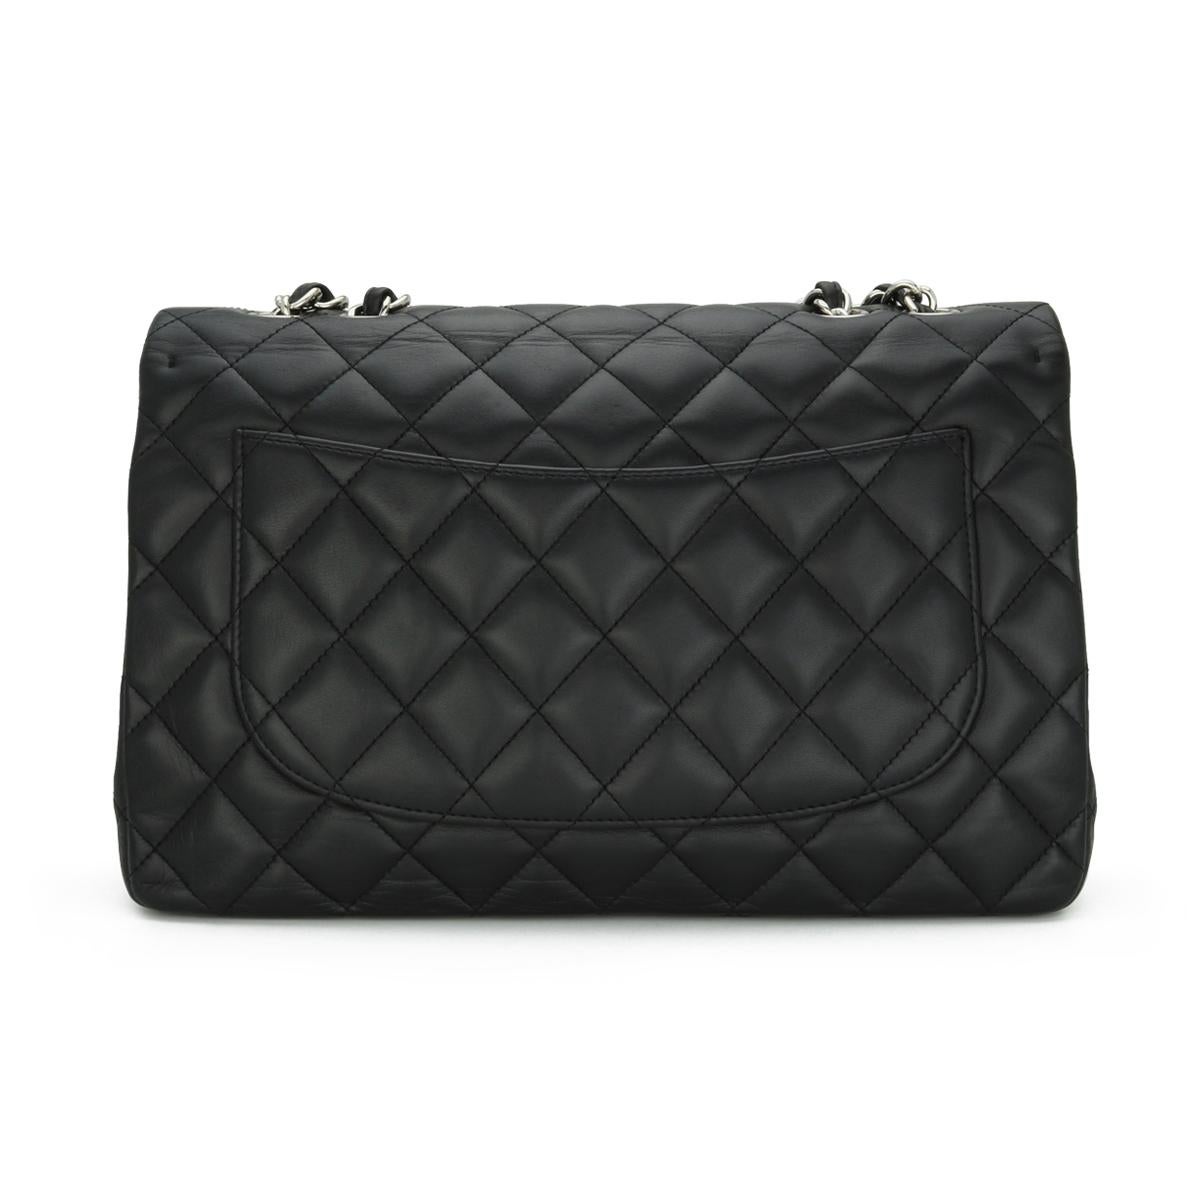 CHANEL Single Flap Jumbo Bag in Black Lambskin with Silver-Tone Hardware 2010 In Fair Condition For Sale In Huddersfield, GB